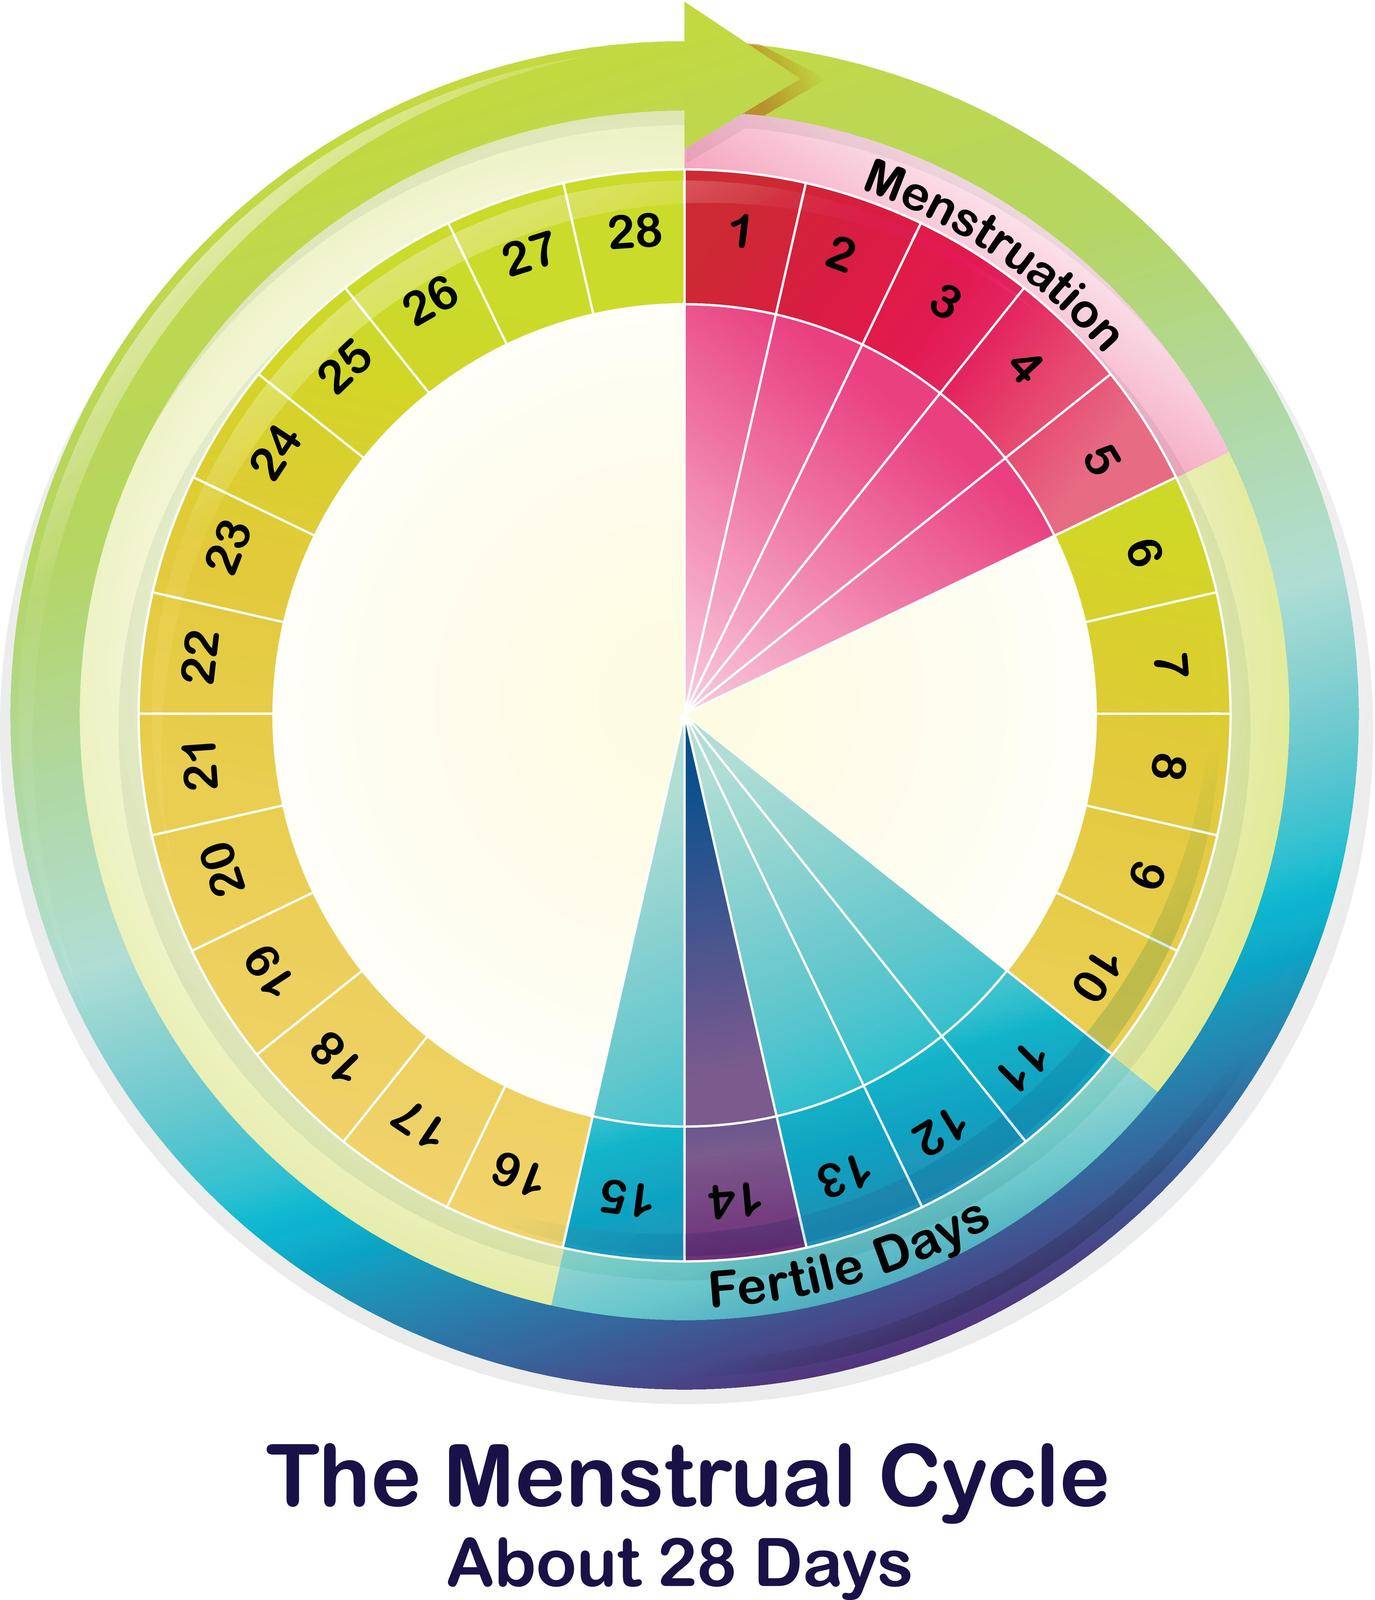 The Menstrual Cycle by iimages